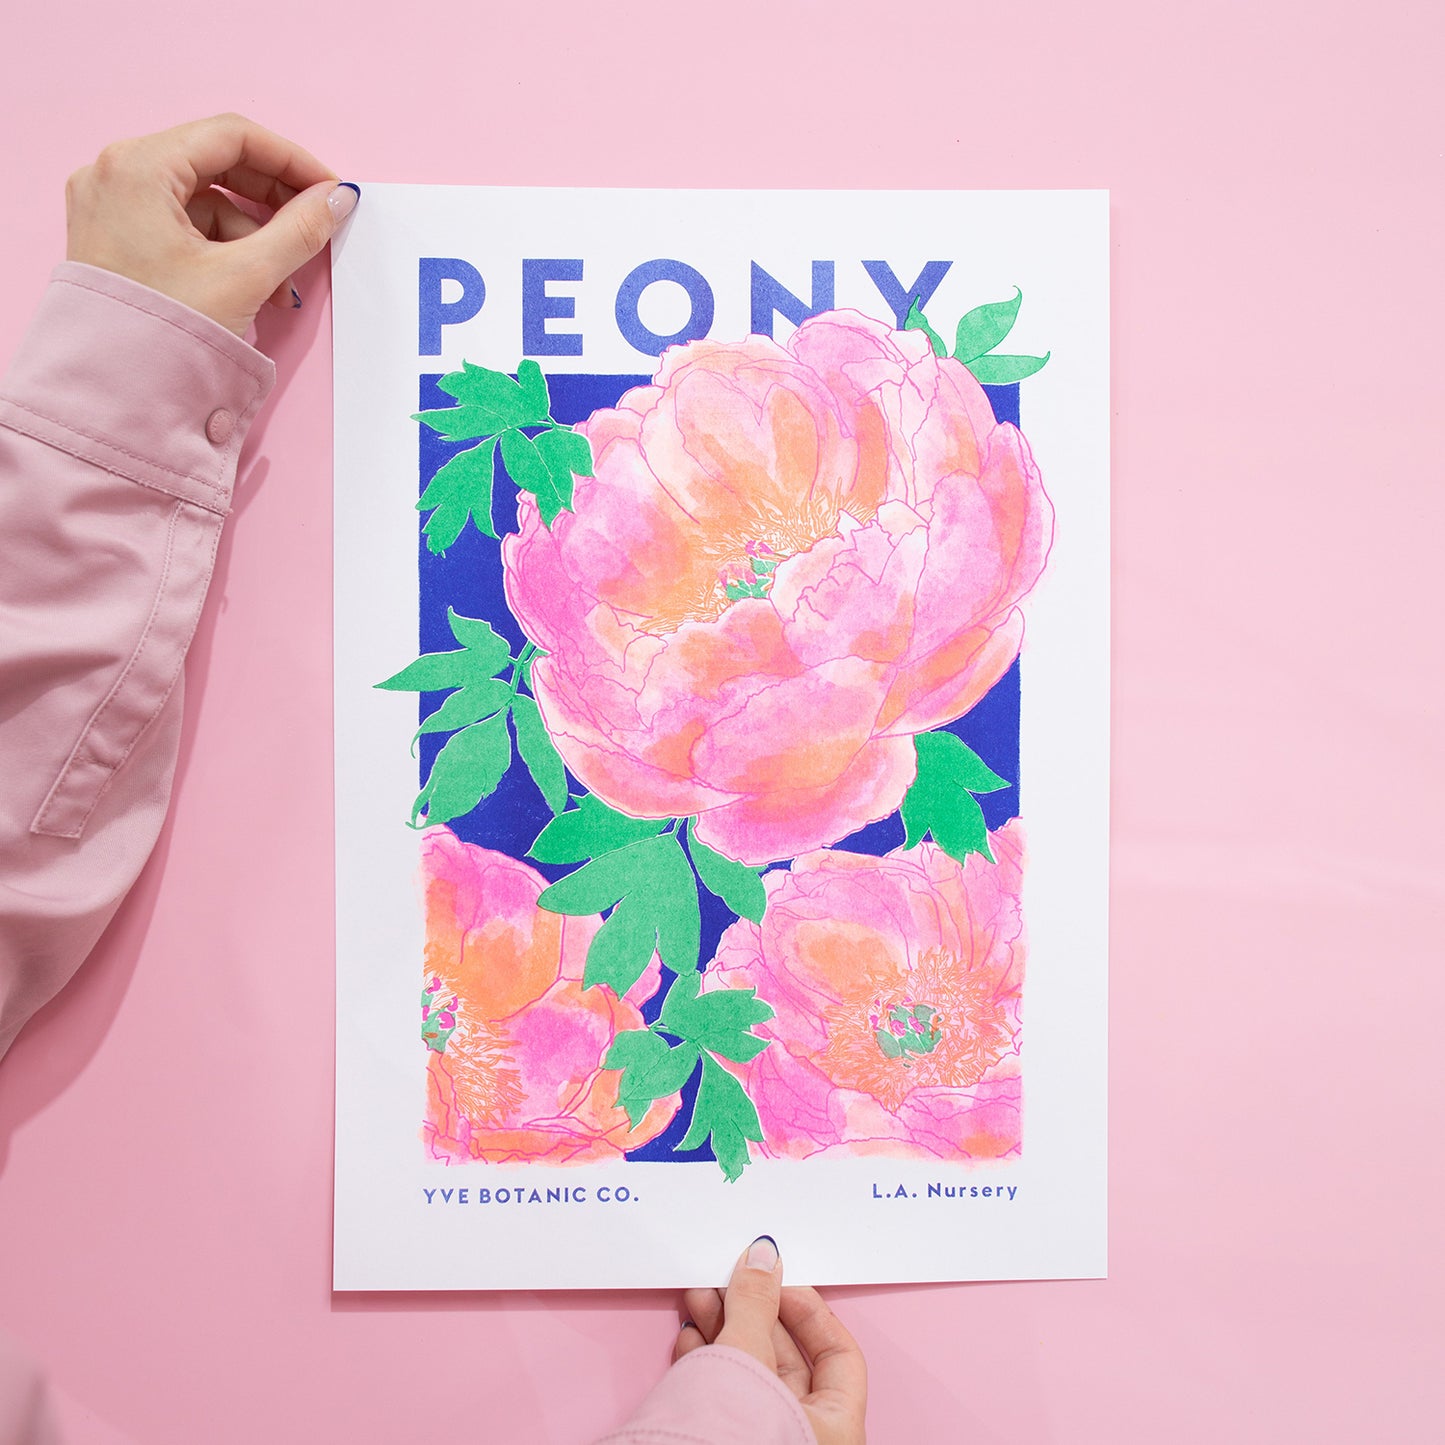 Load image into Gallery viewer, A person holding a print featuring an illustration of a Peony flower - pink background
